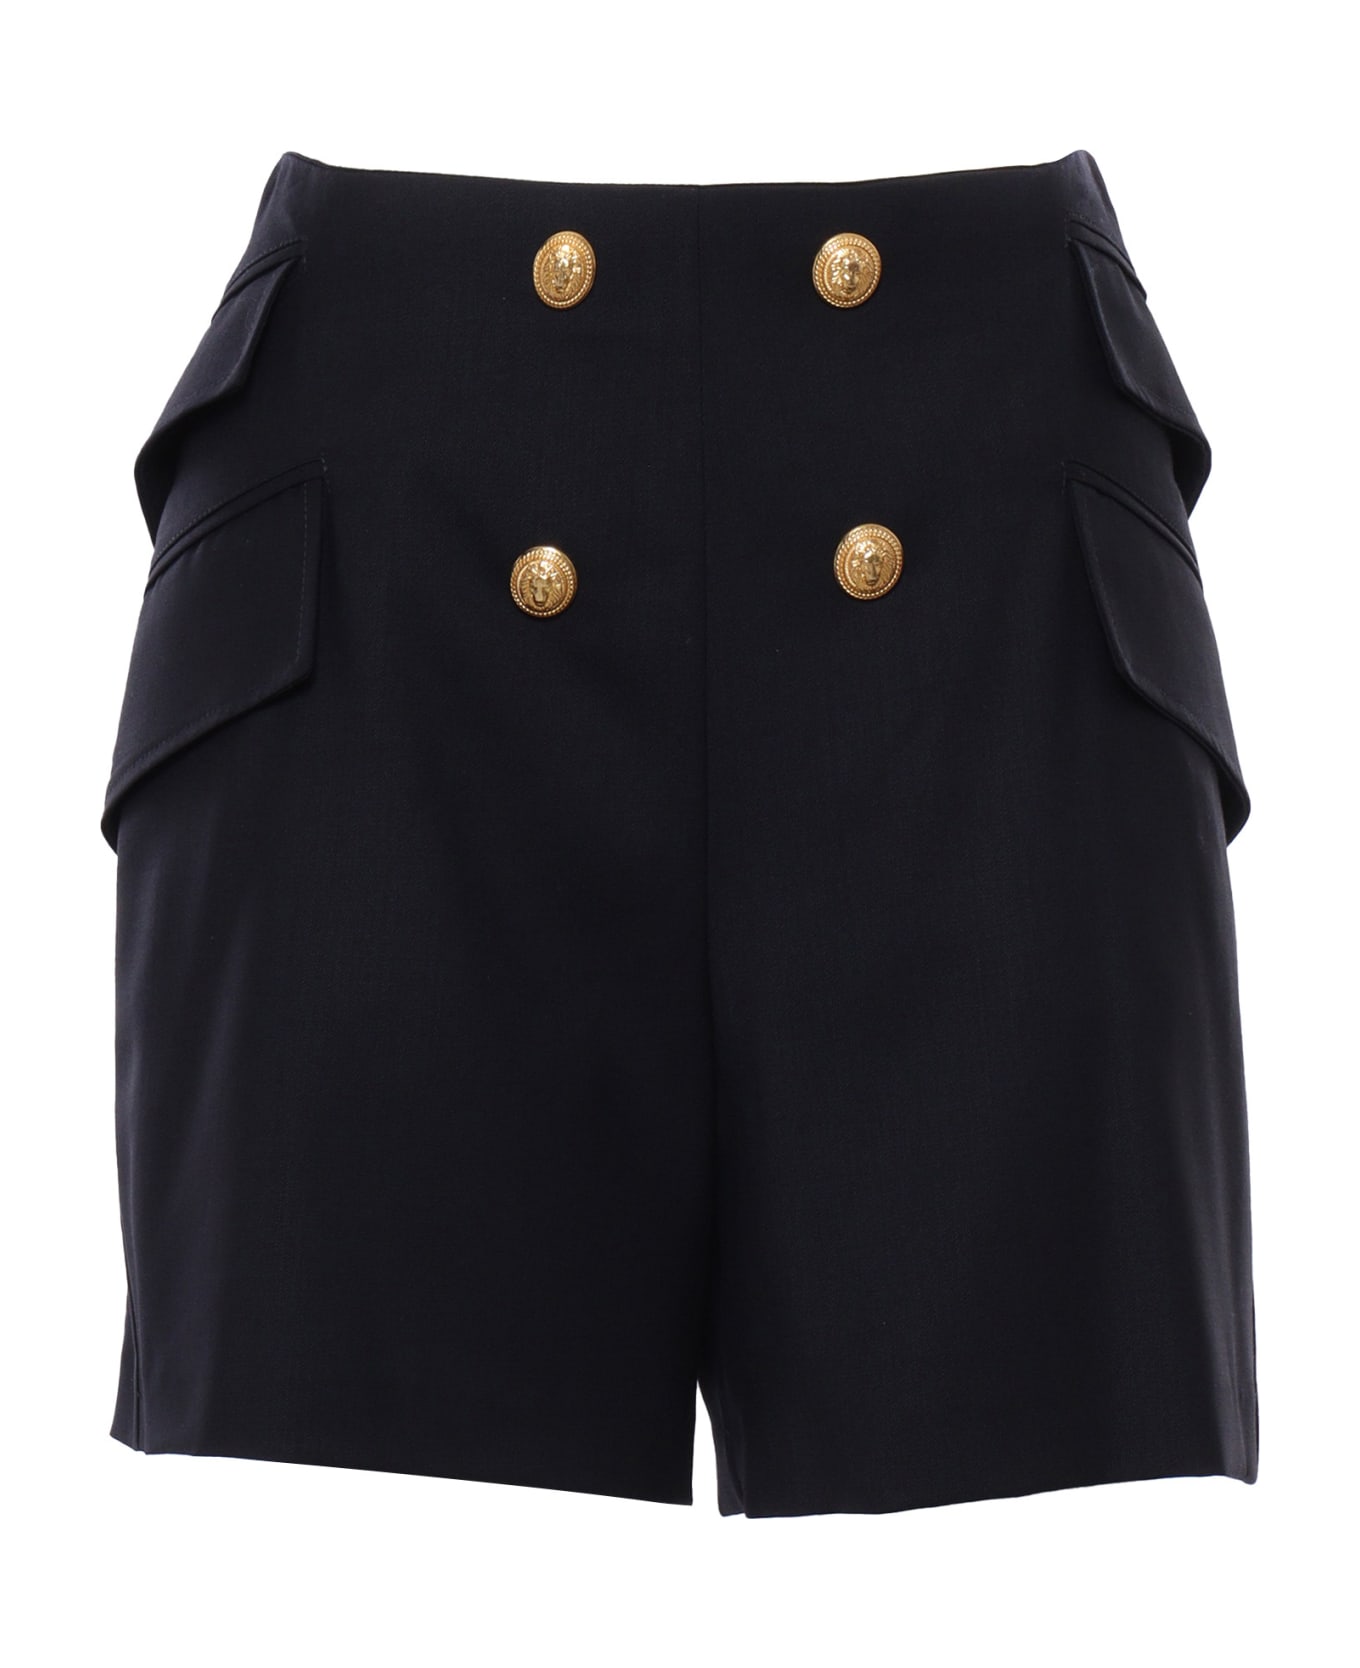 Balmain Black Shorts With Buttons - BLUE ボトムス